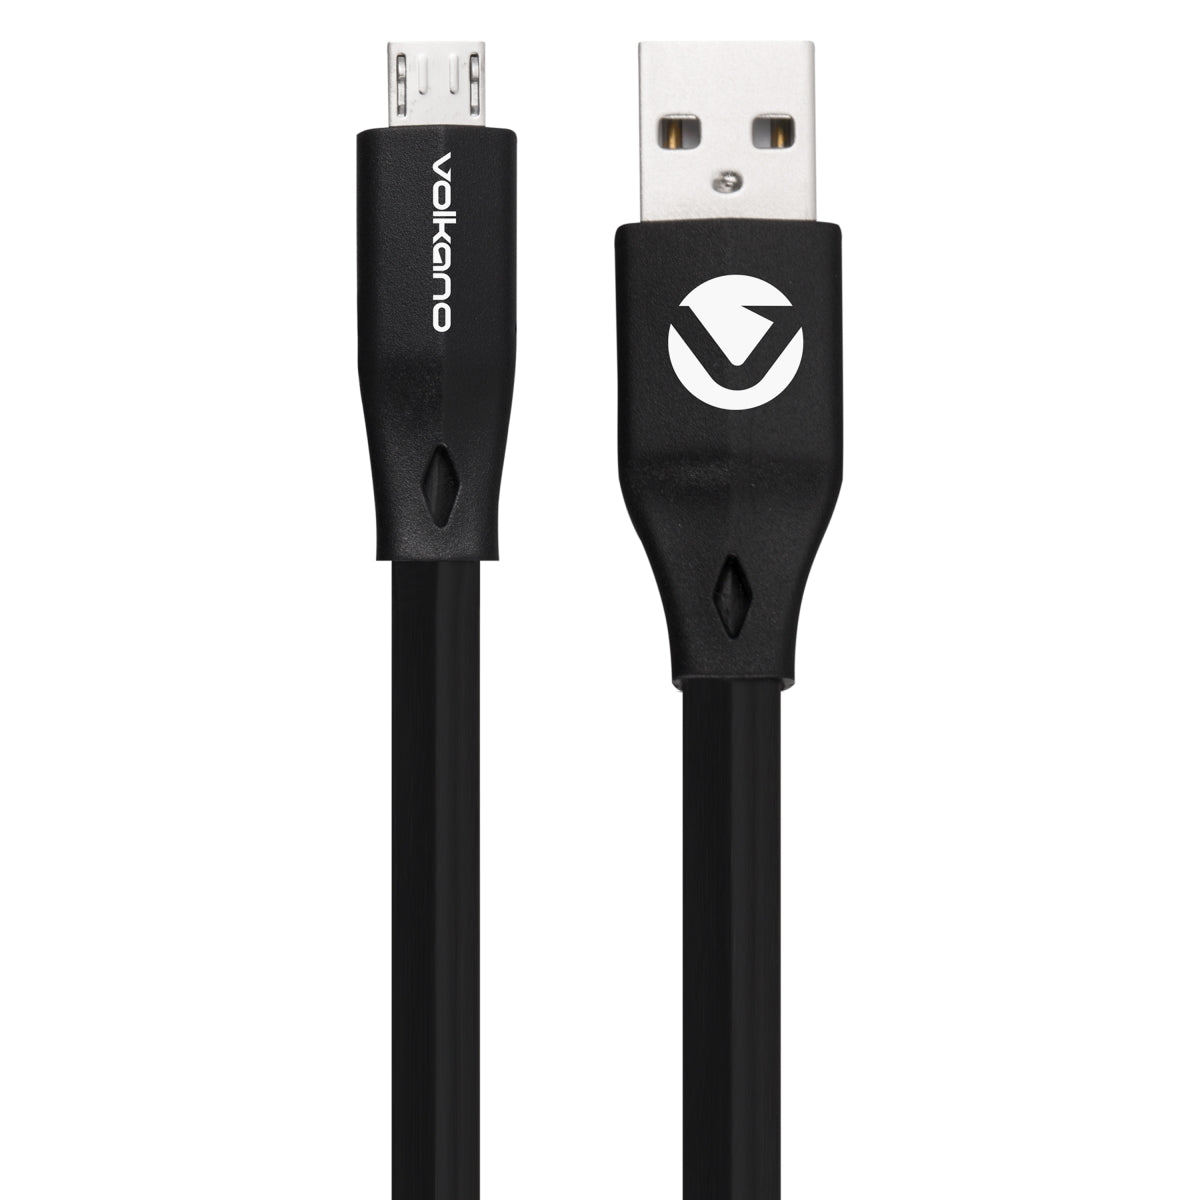 VK Micro USB Cable VK-20082